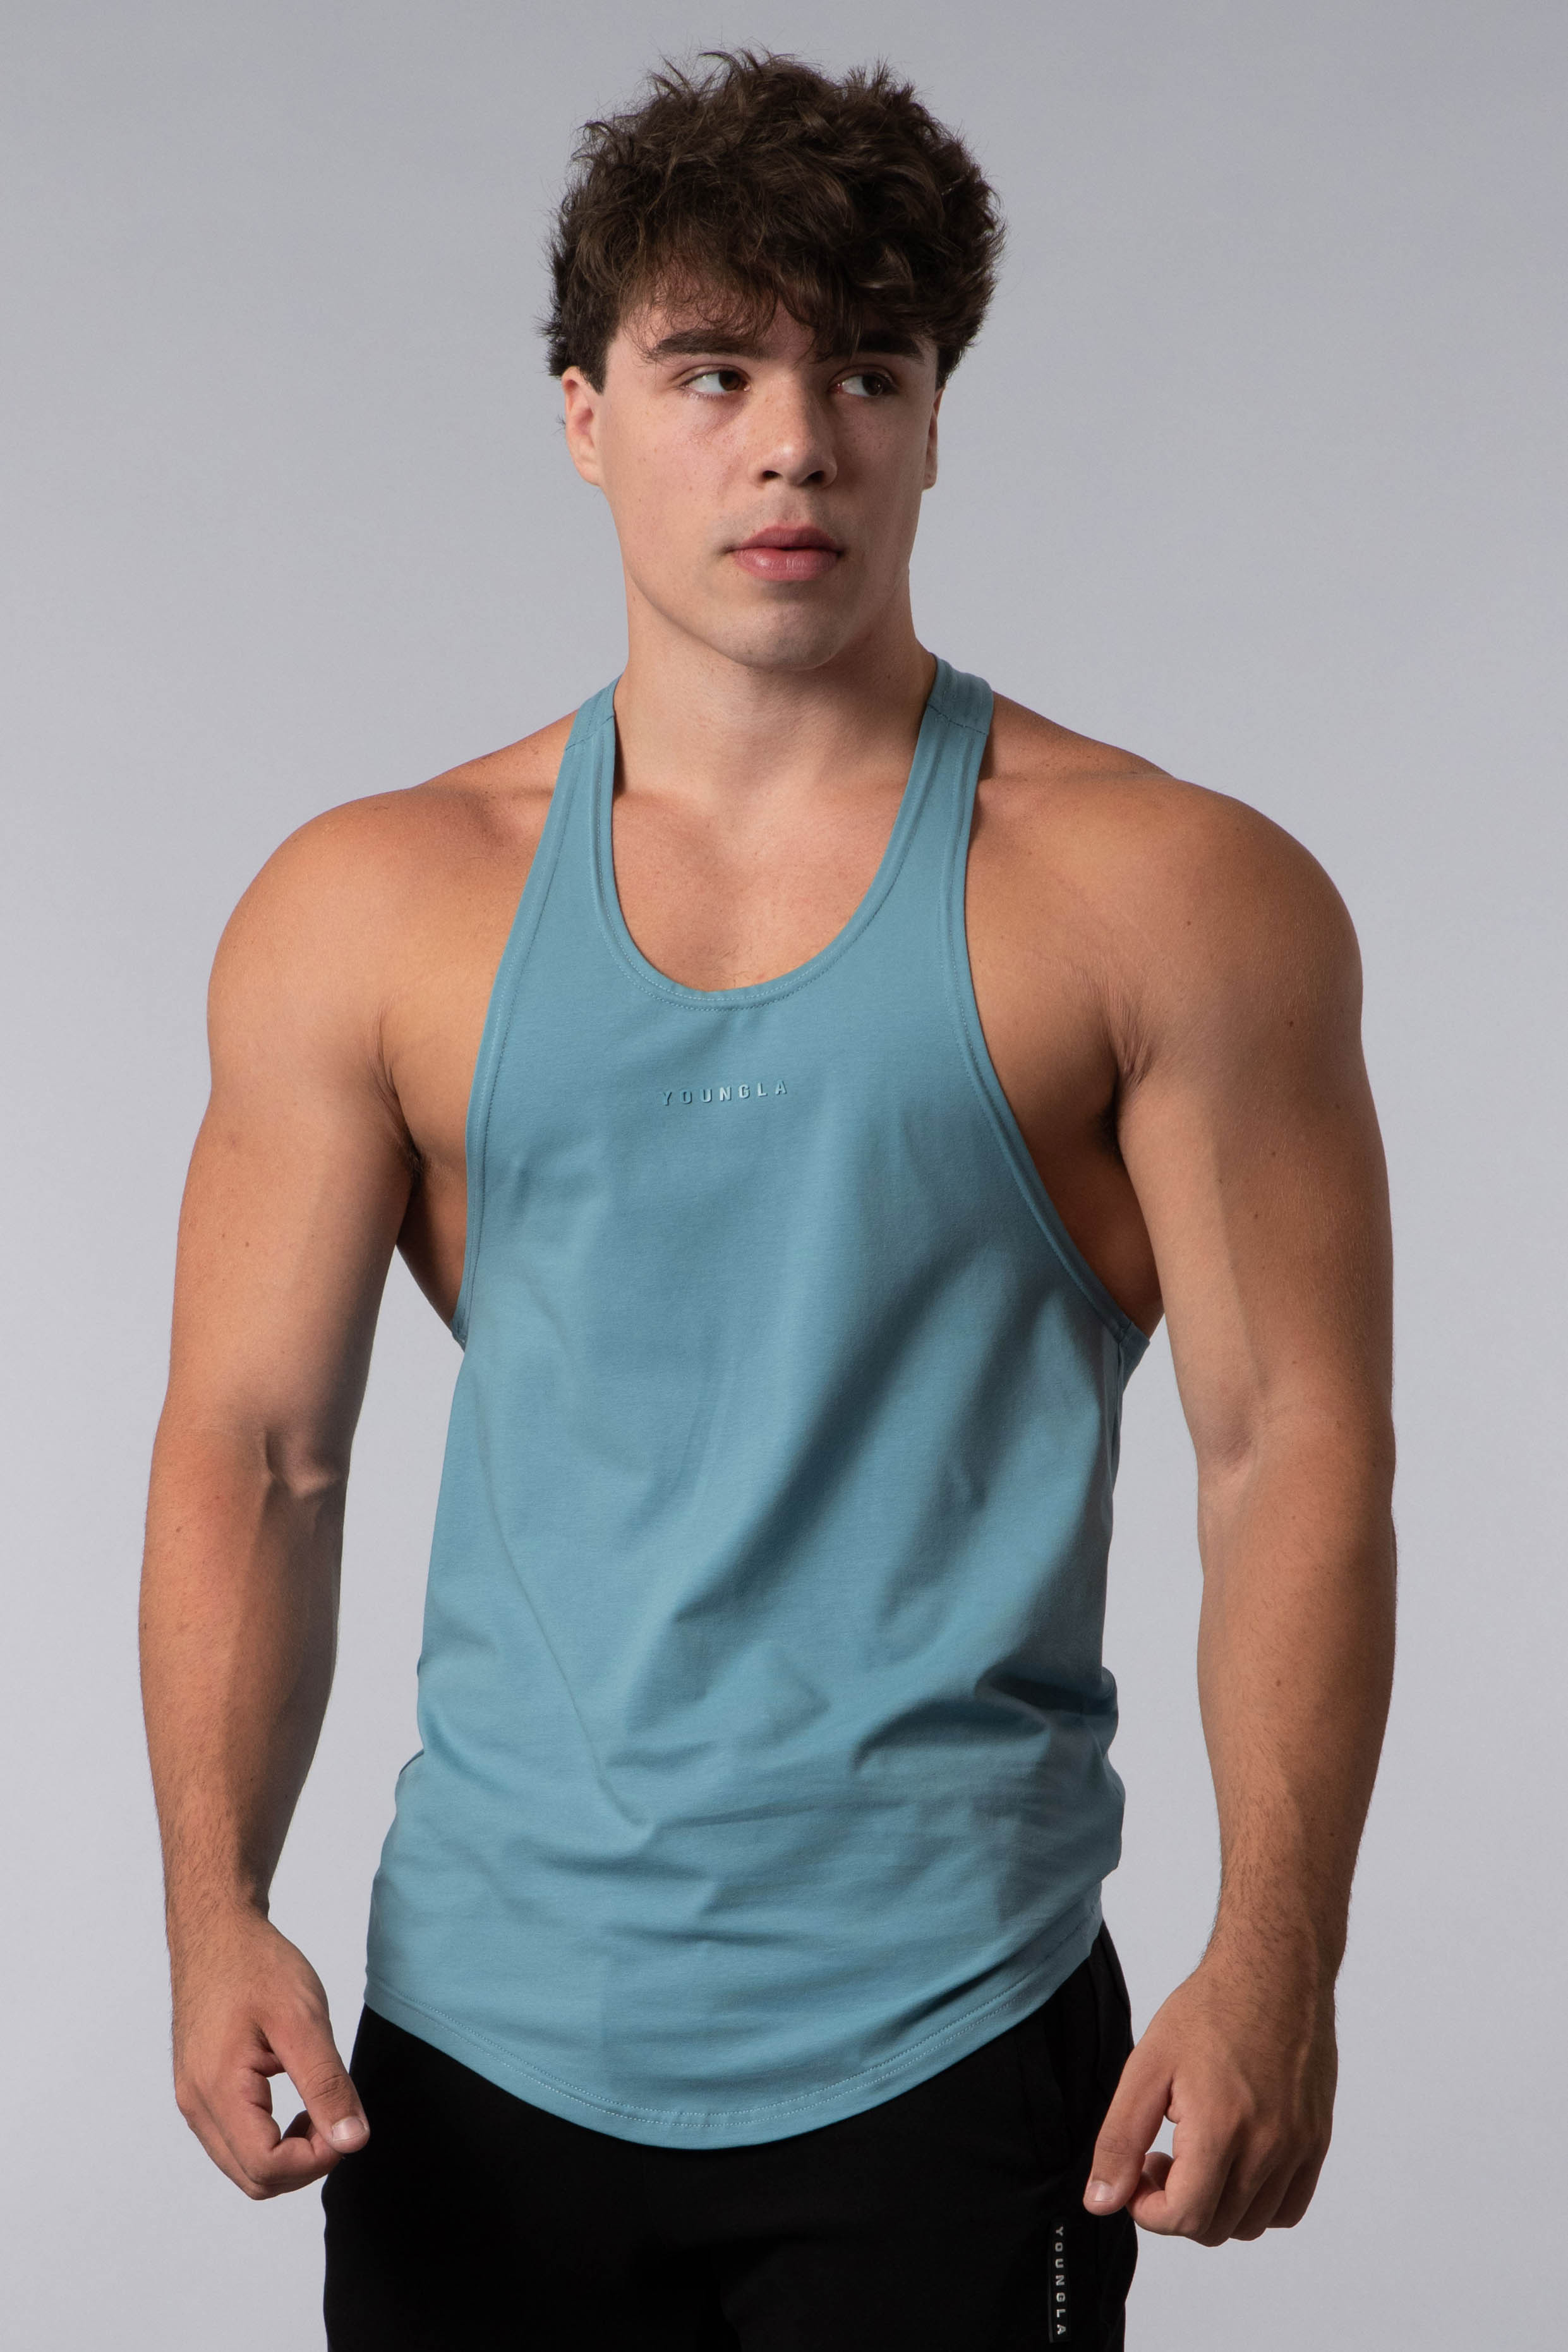 YoungLa Tank Top Mens Size Small Blue